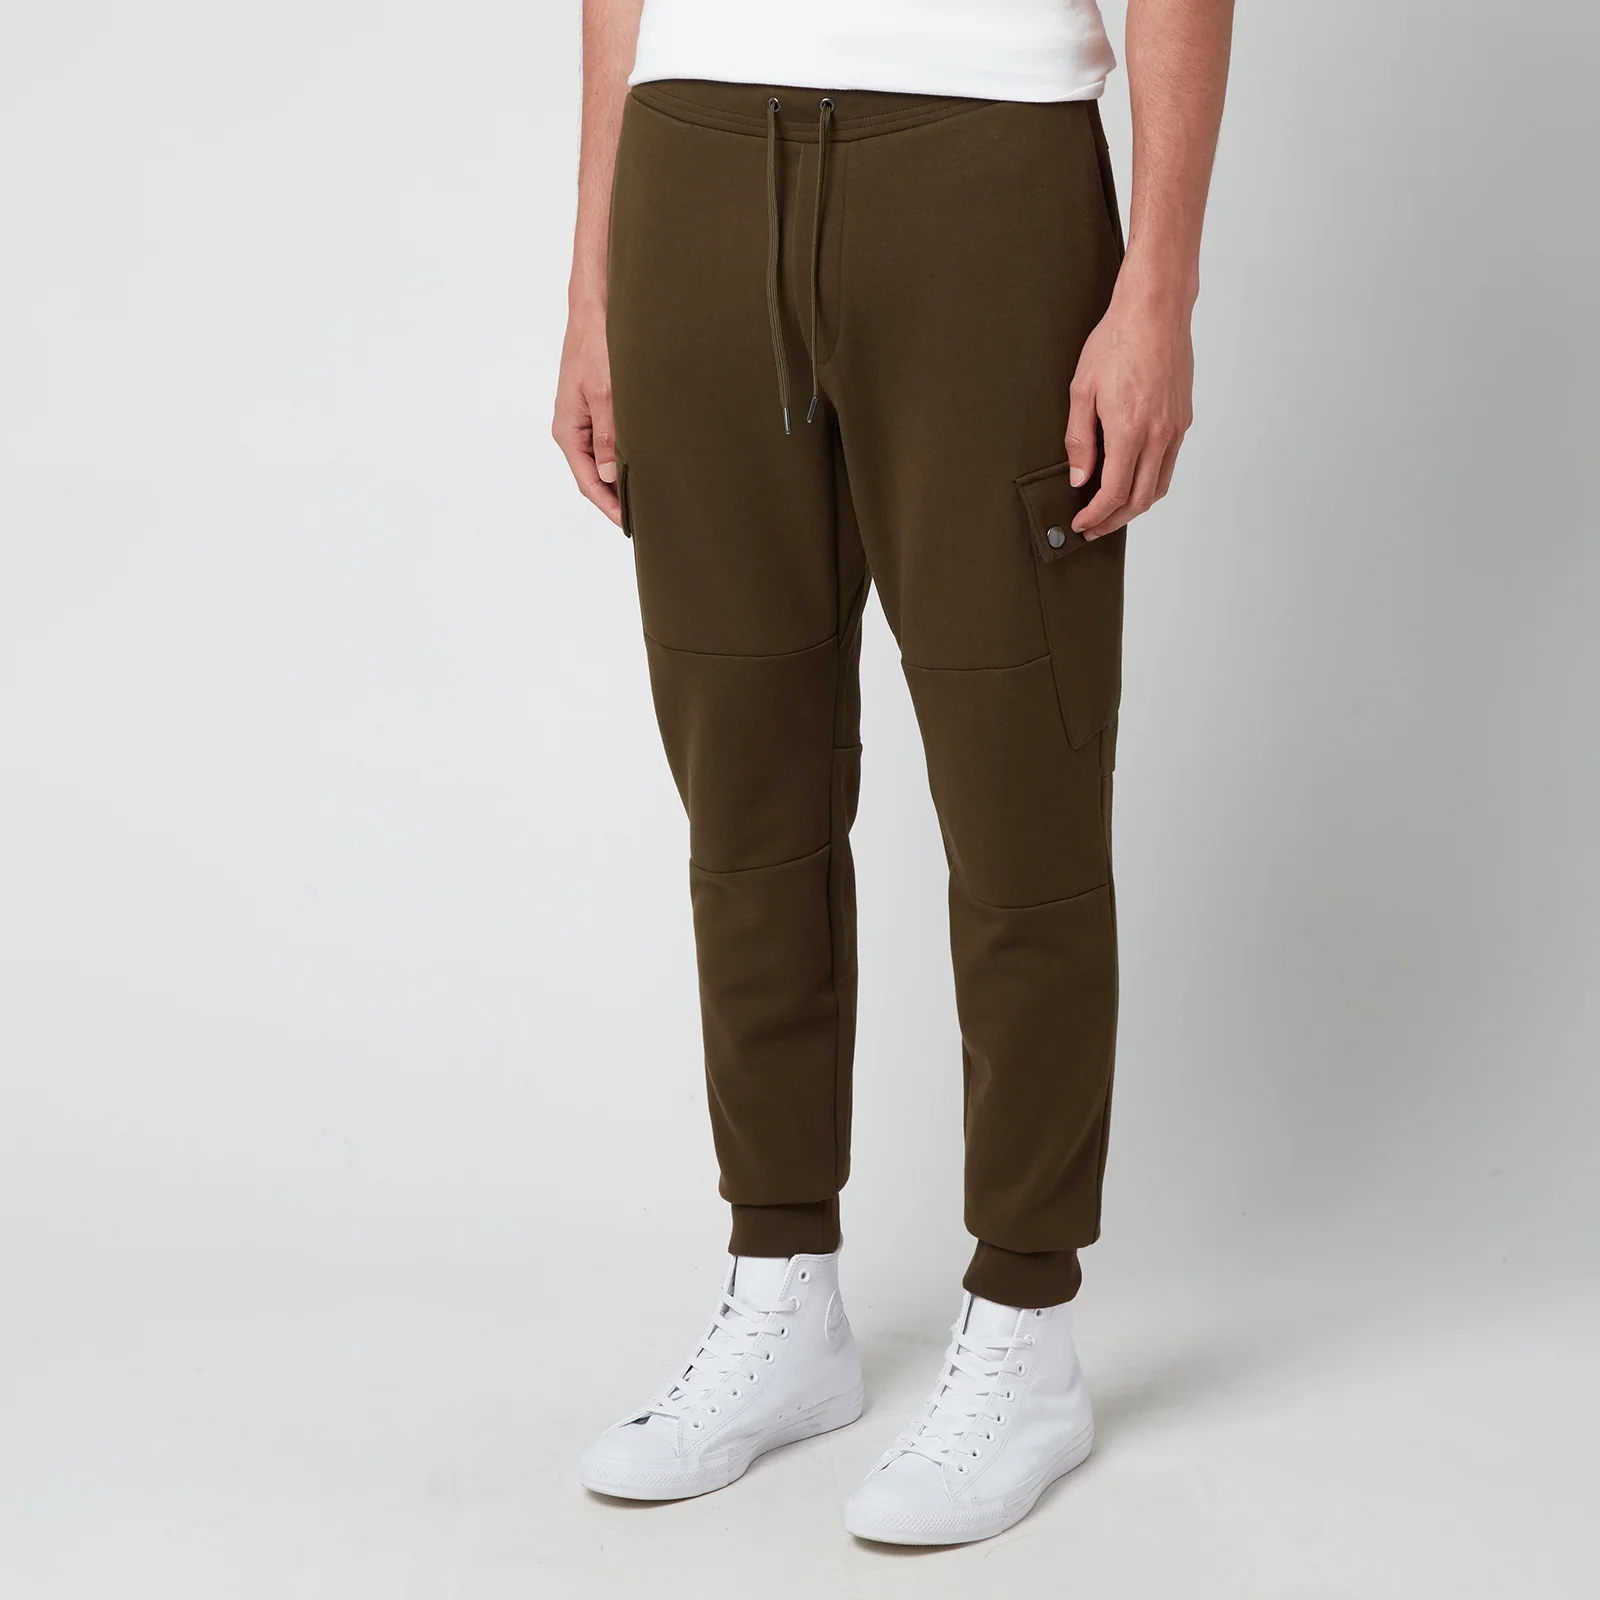 Polo Ralph Lauren Men's Double Knit Cargo Jogger Trousers - Company Olive Image 1